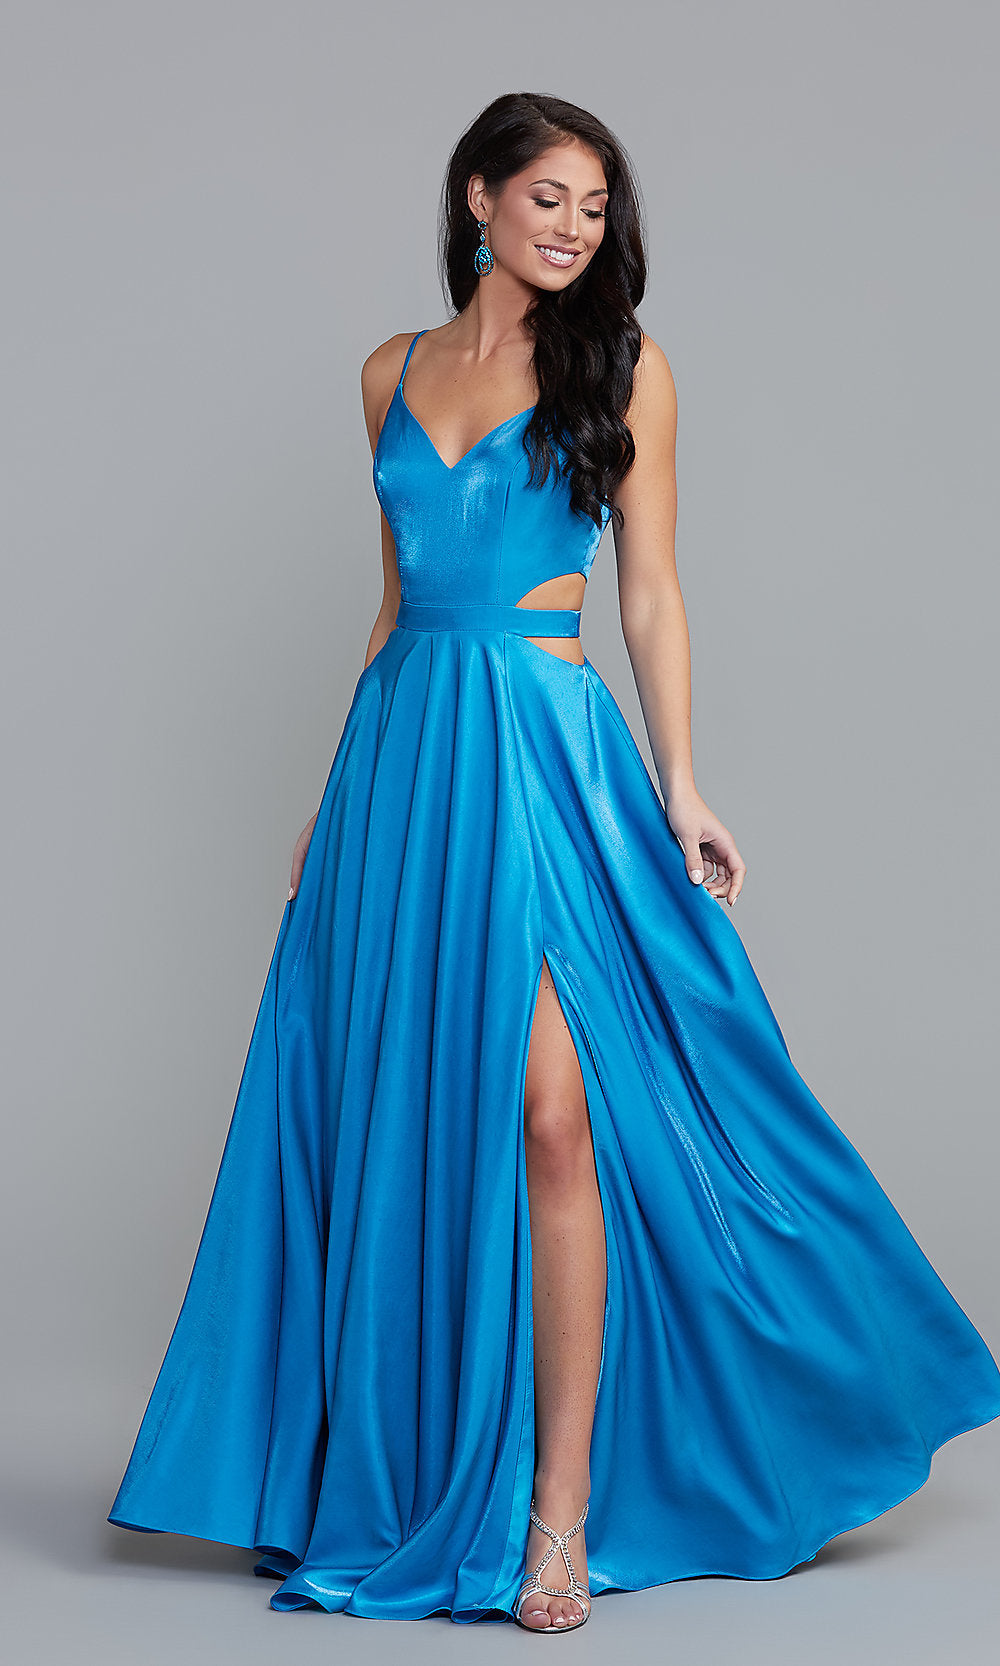 Aqua Shimmer Long Shimmer Formal Prom Dress with Side Cut Outs